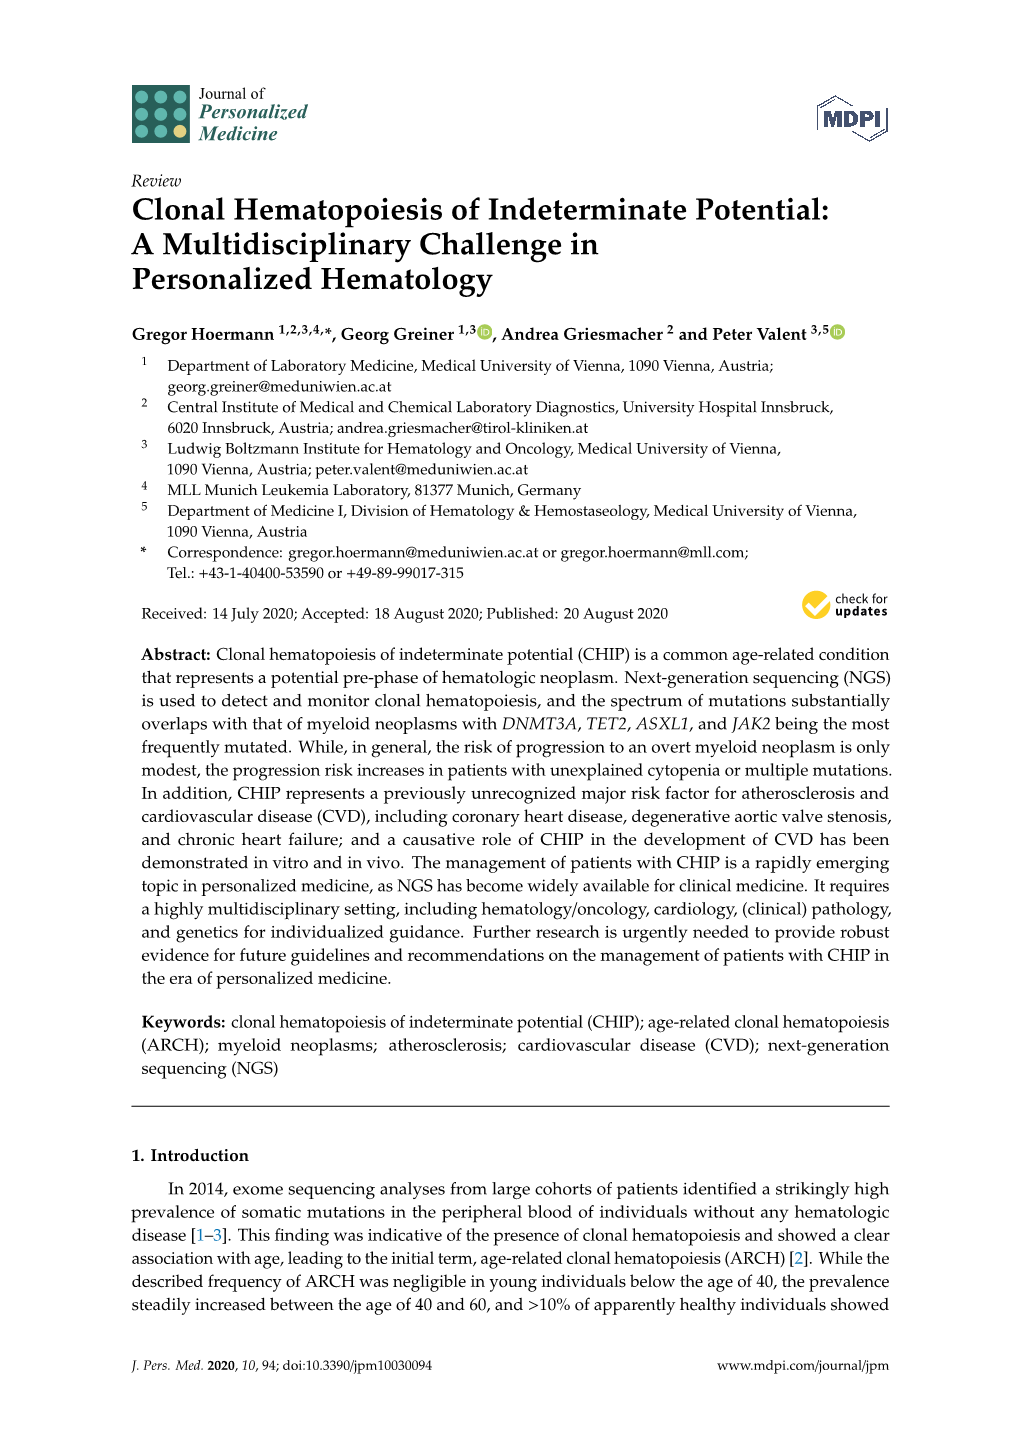 Clonal Hematopoiesis of Indeterminate Potential: a Multidisciplinary Challenge in Personalized Hematology